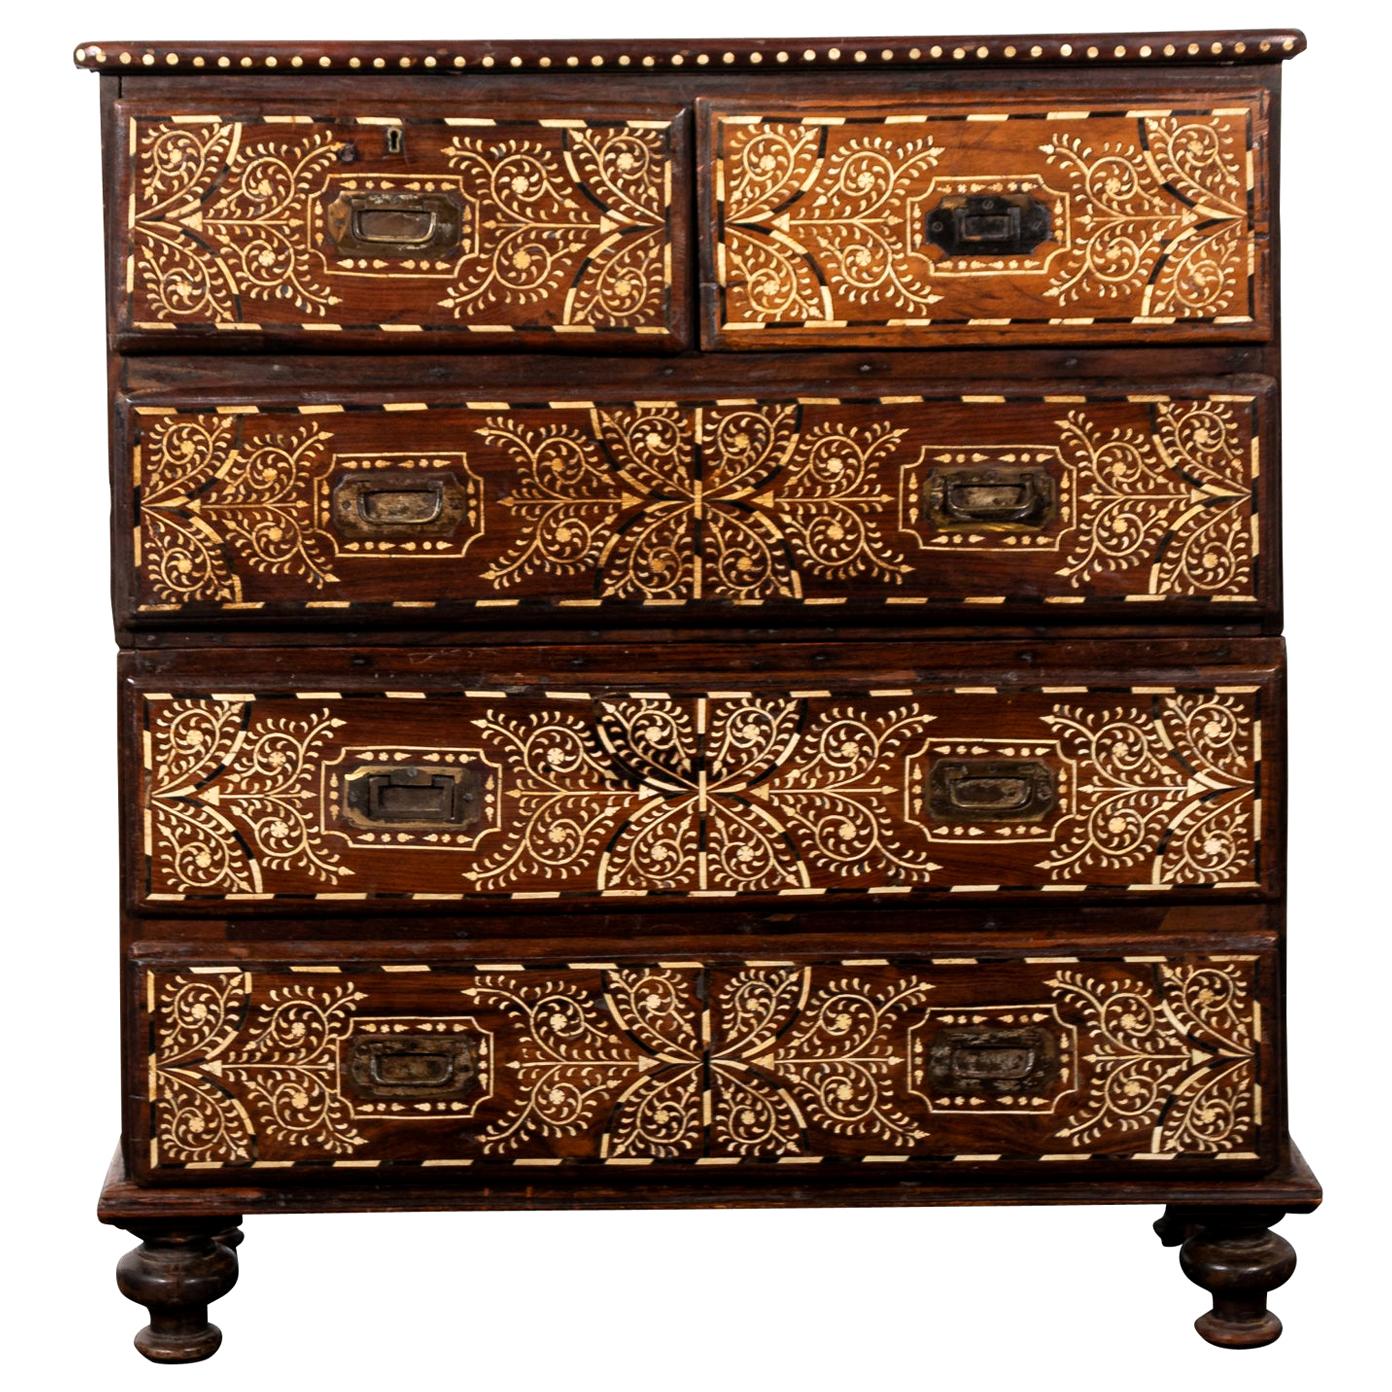 Wood and Bone Inlay Campaign Chest of Drawers